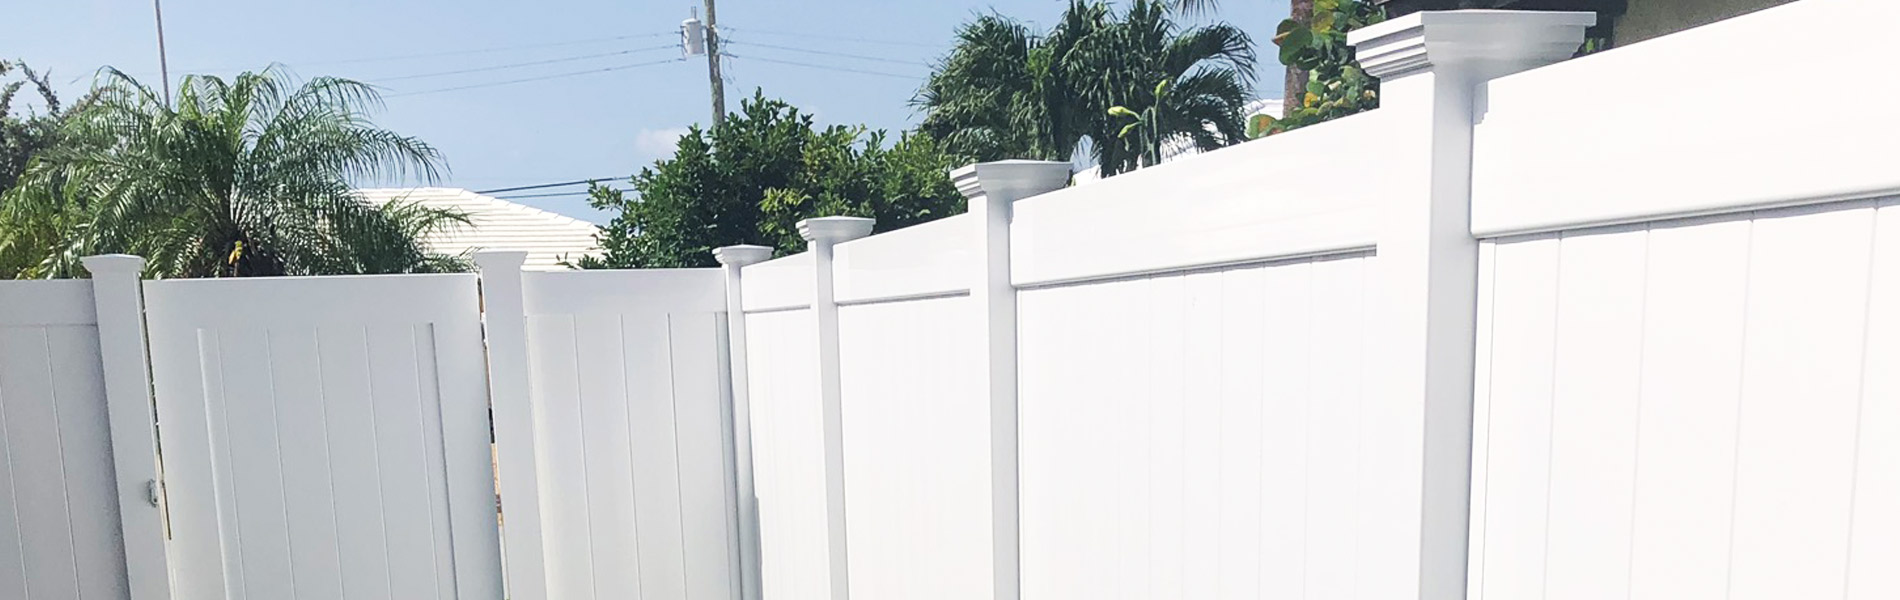 Standard Vinyl Privacy Fence Panels in South & Central Florida